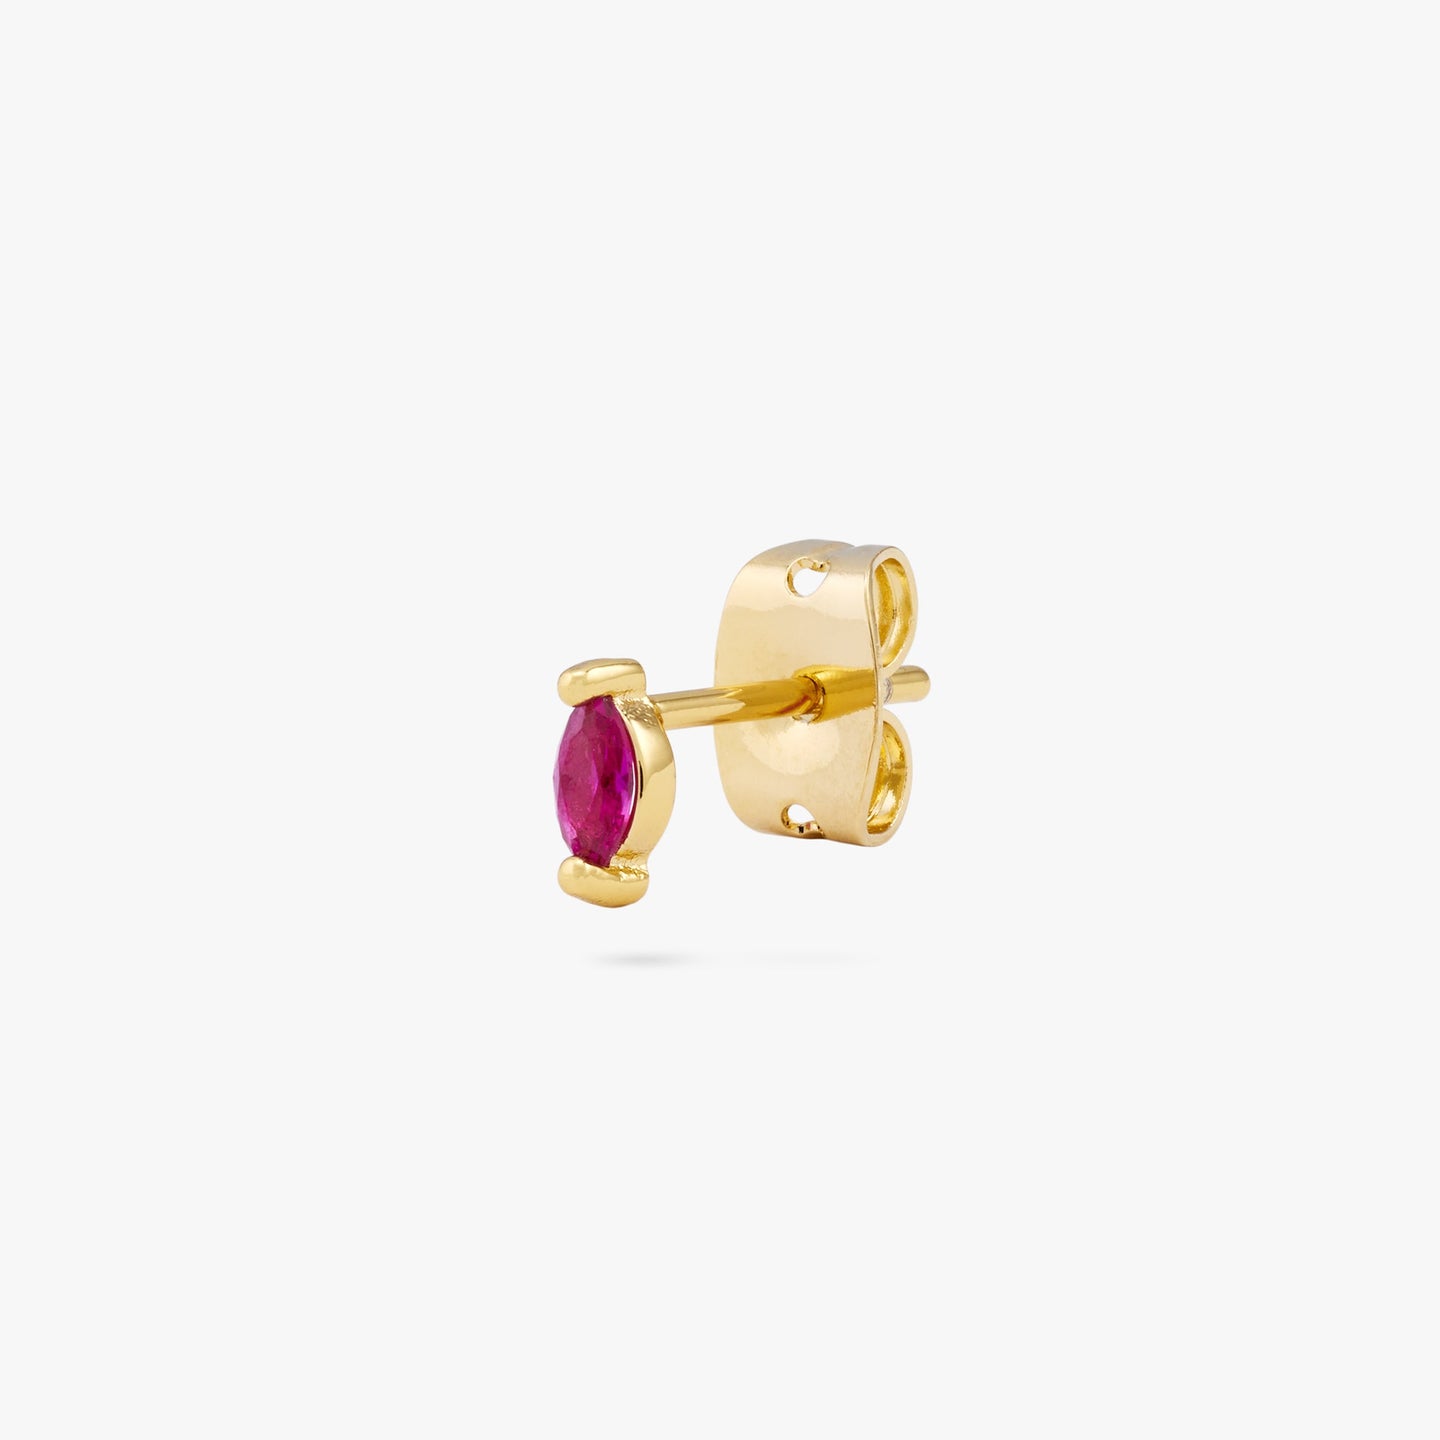 The marquise mini stud features a pink oblong shaped gem and has gold accents color:null|gold/pink